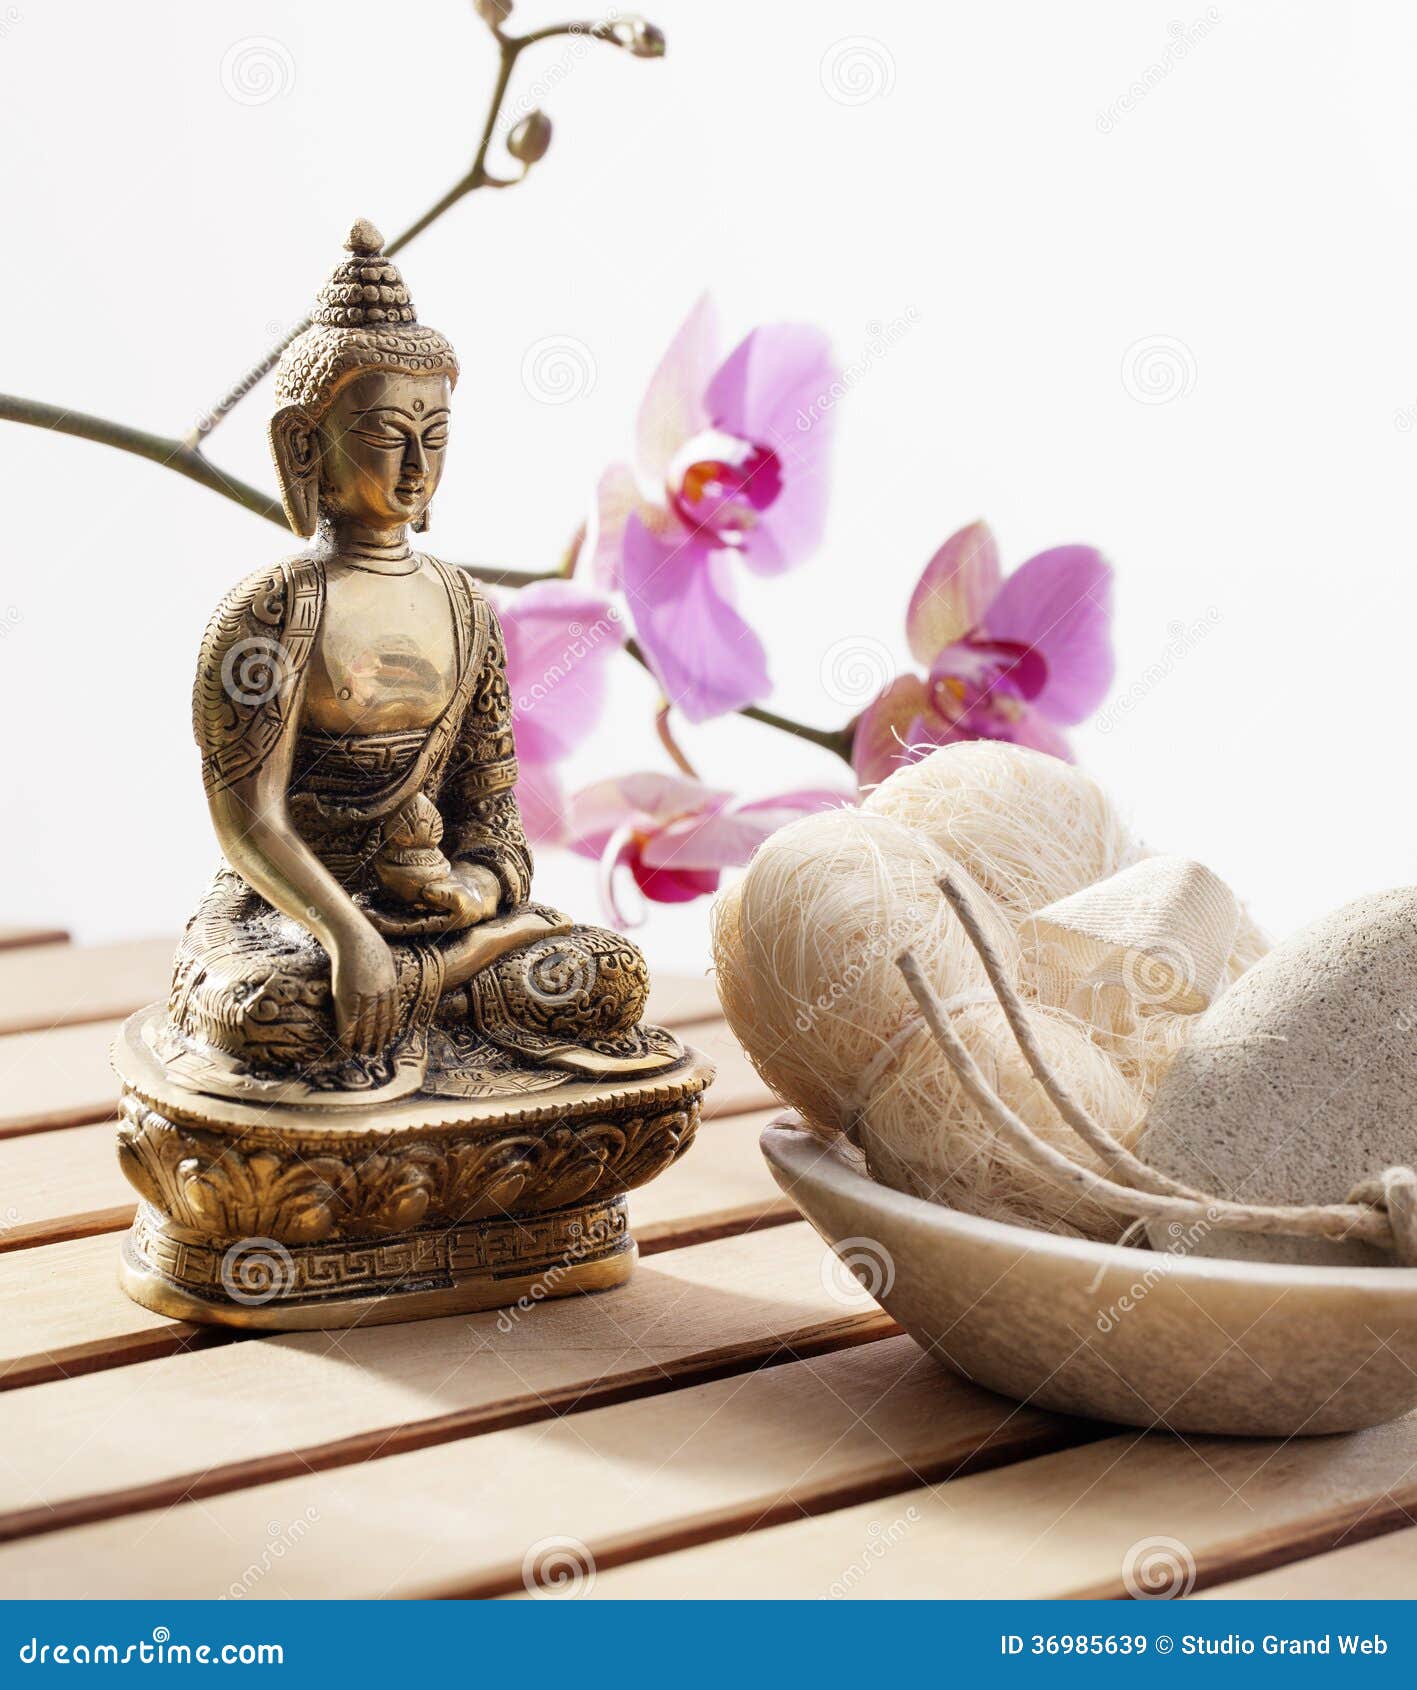 Buddha for Serenity at Beauty Center Stock Image - Image of natural ...